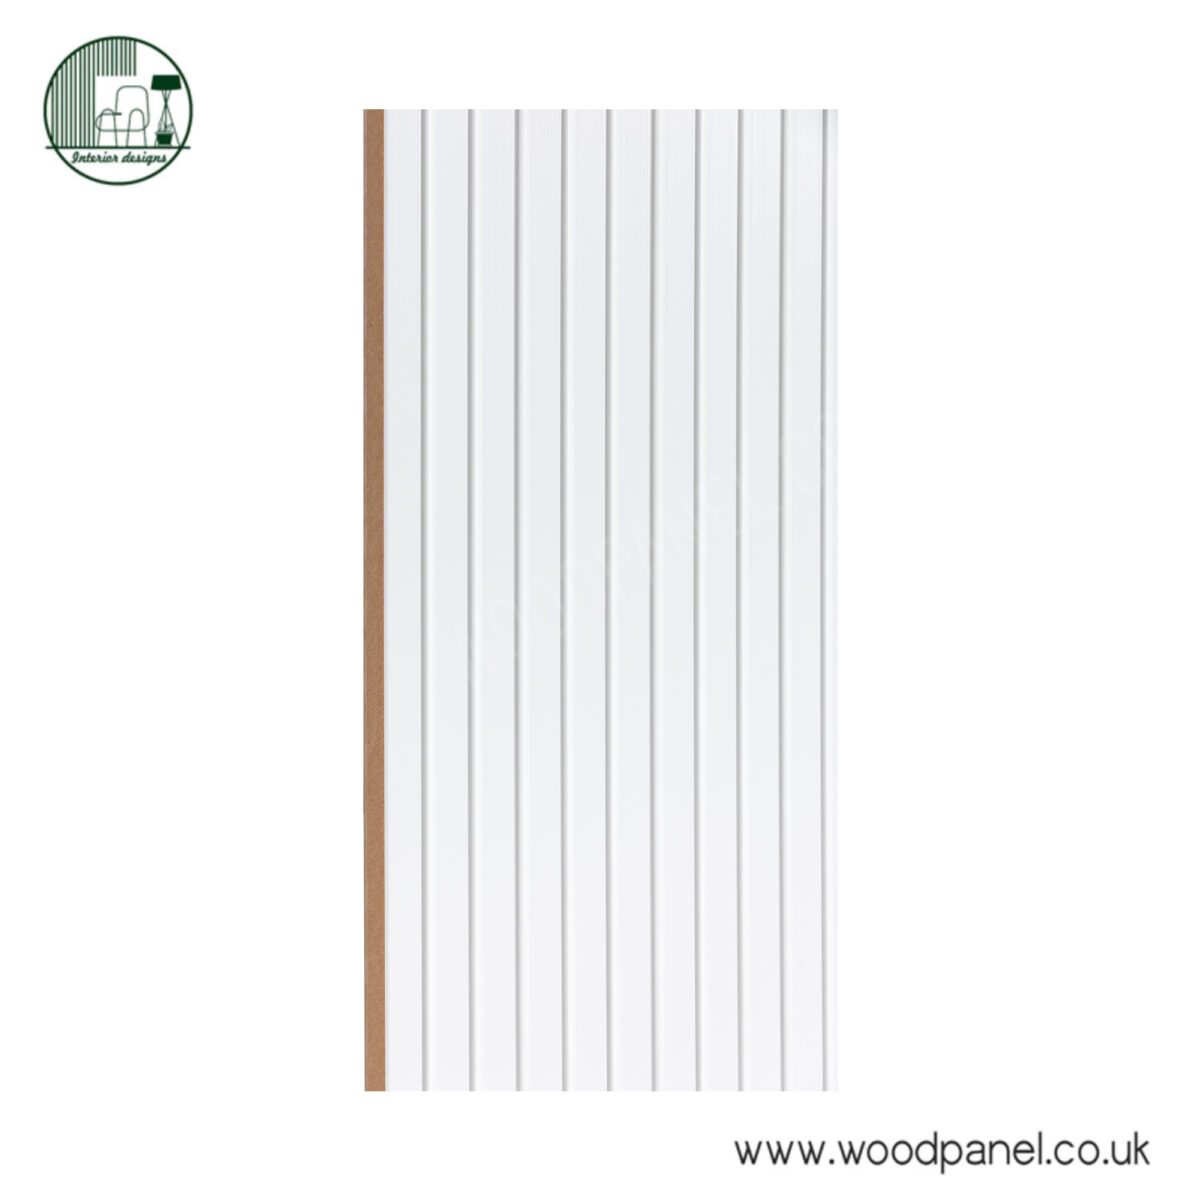 W1000 125 02 Magnum Opus Wood panel COLLECTION PANEL W1000 Premium White WITH WOOD GRAIN FINISH, ST125